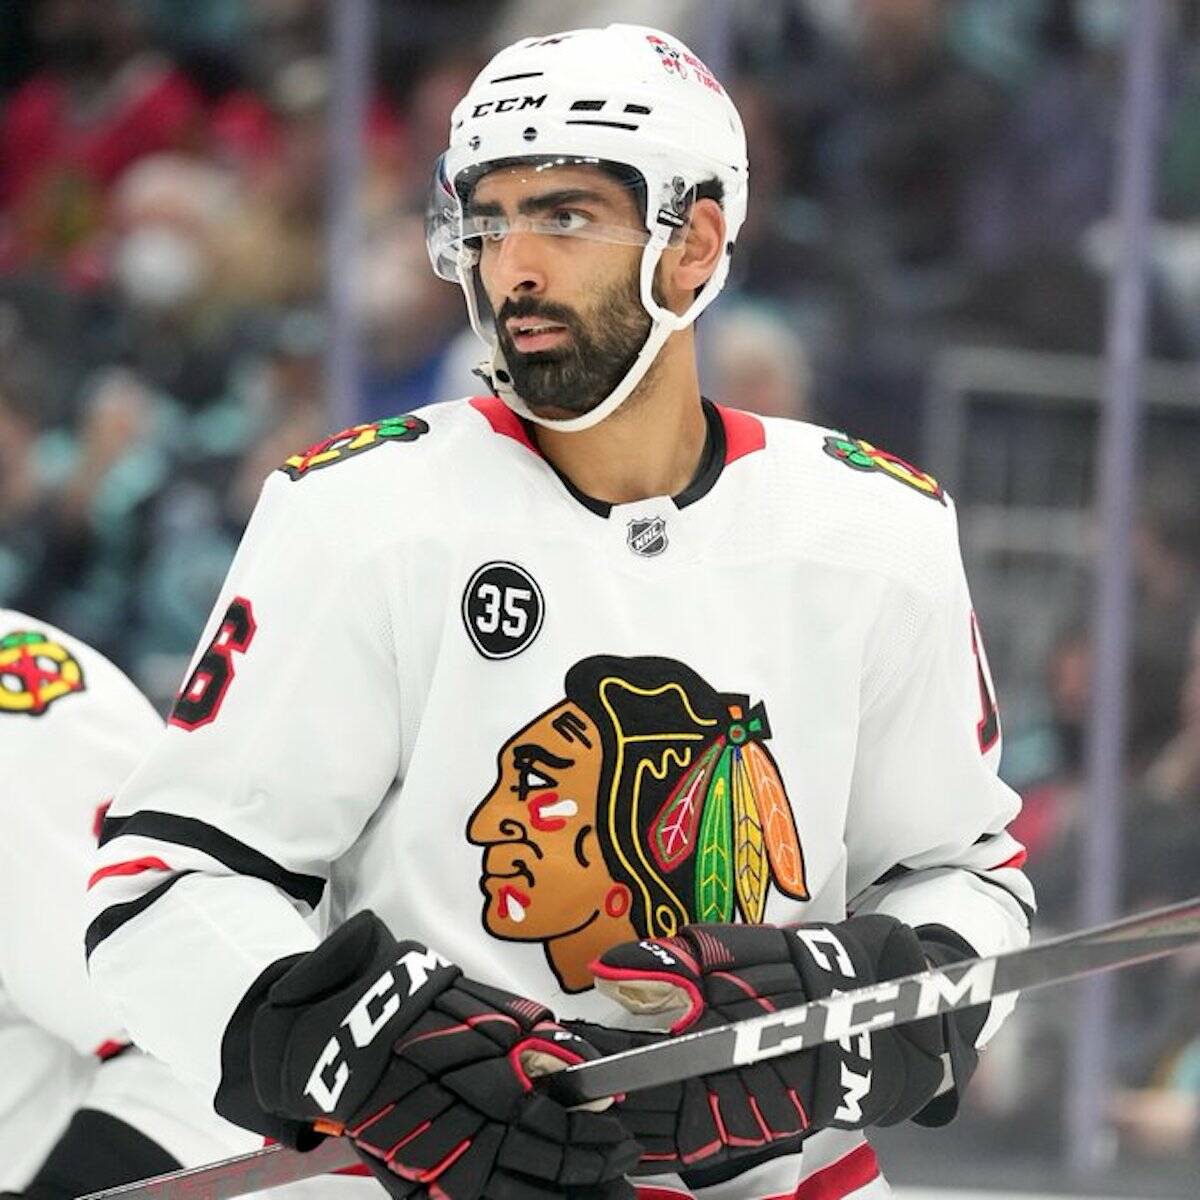 Jujhar Khaira: That Rings A Bell, Jujhar and his girlfriend Jenna will  make your day ☺️⬇️, By Chicago Blackhawks